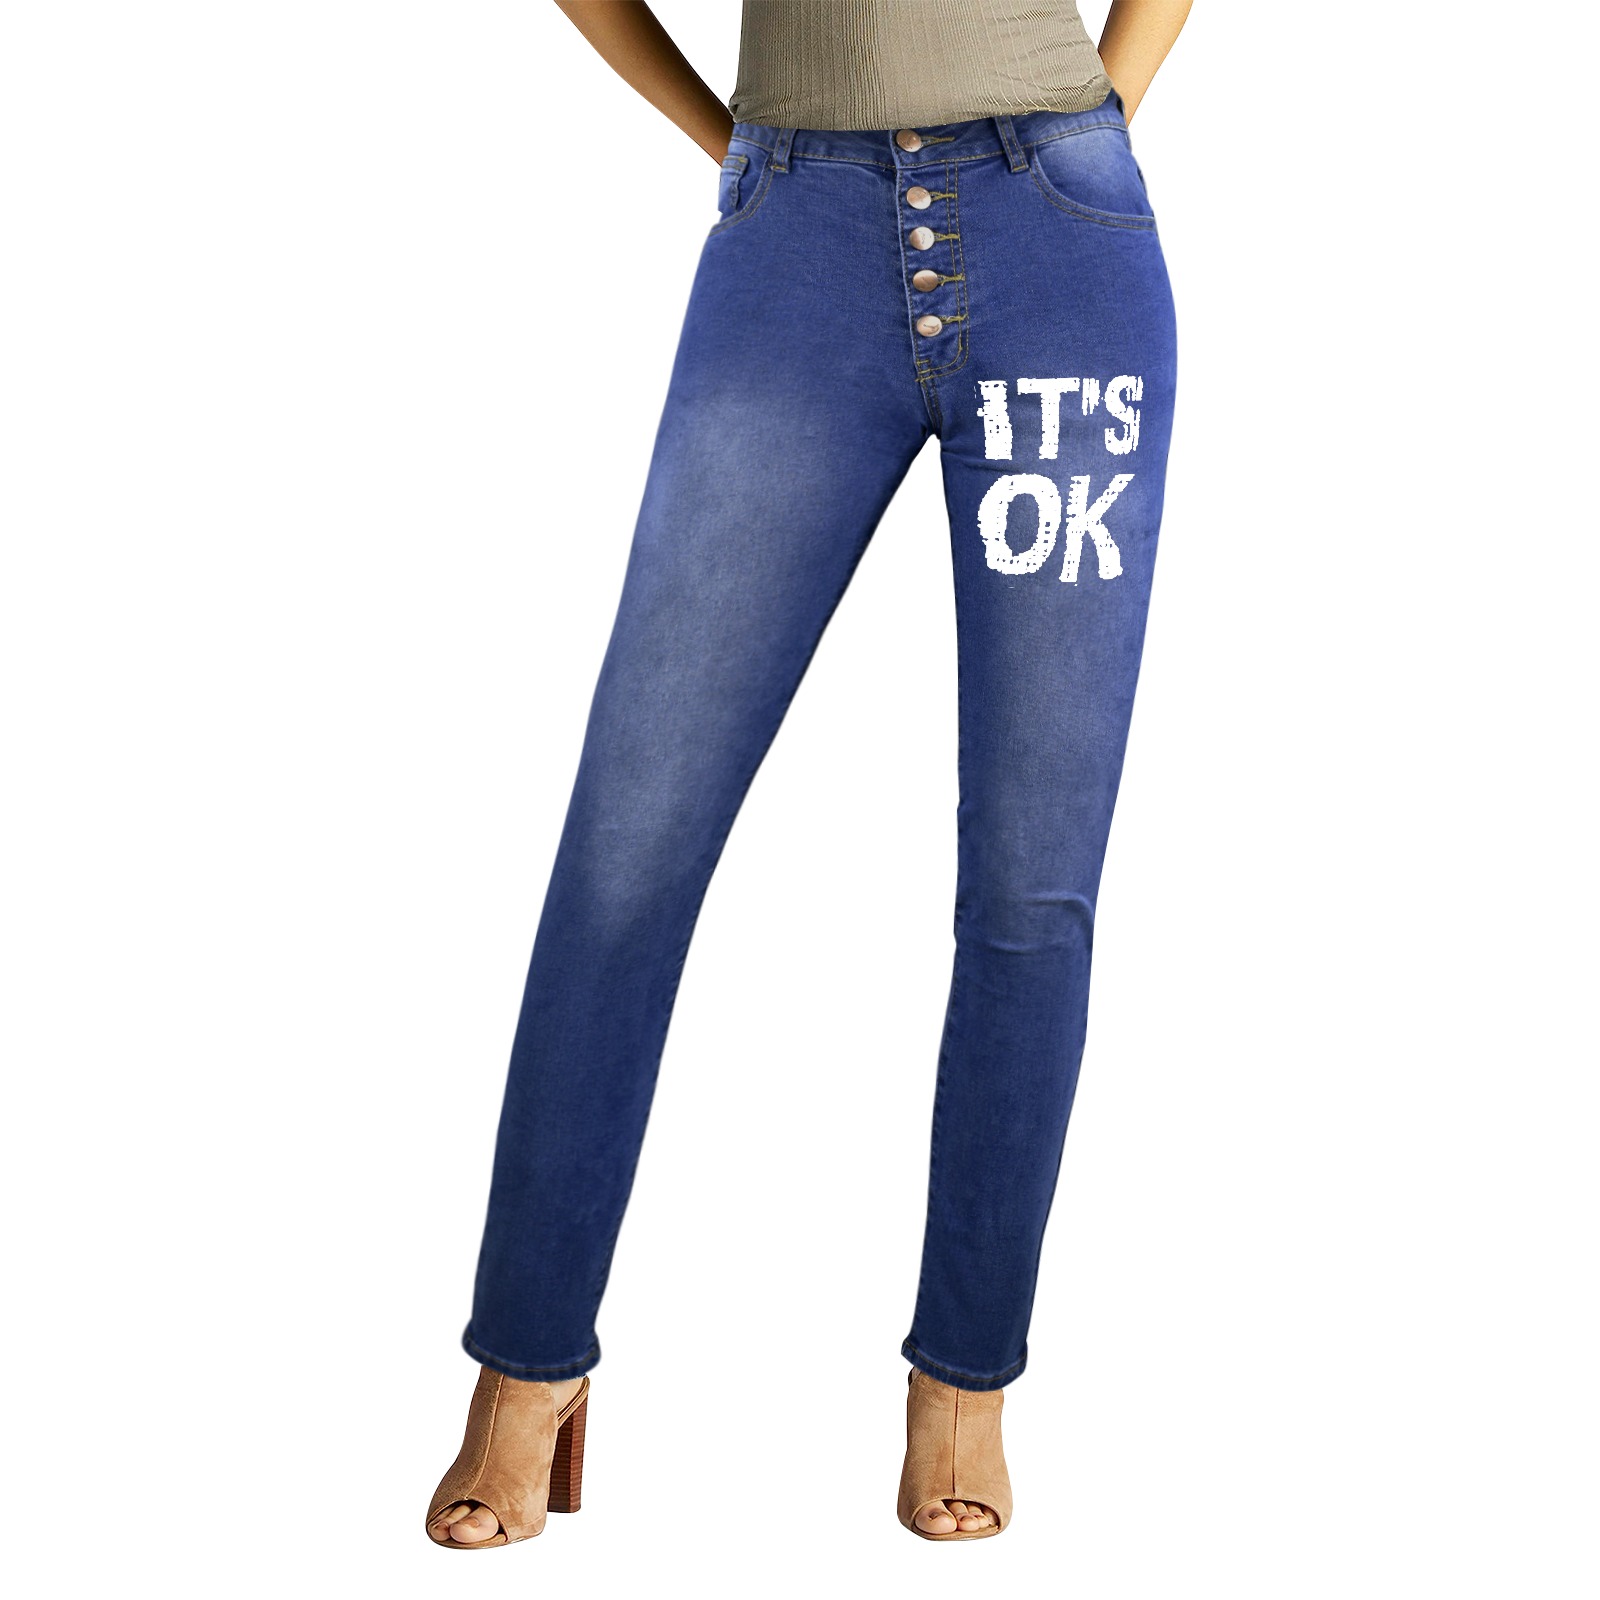 It is OK inspirational white text. Women's Jeans (Front&Back Printing)